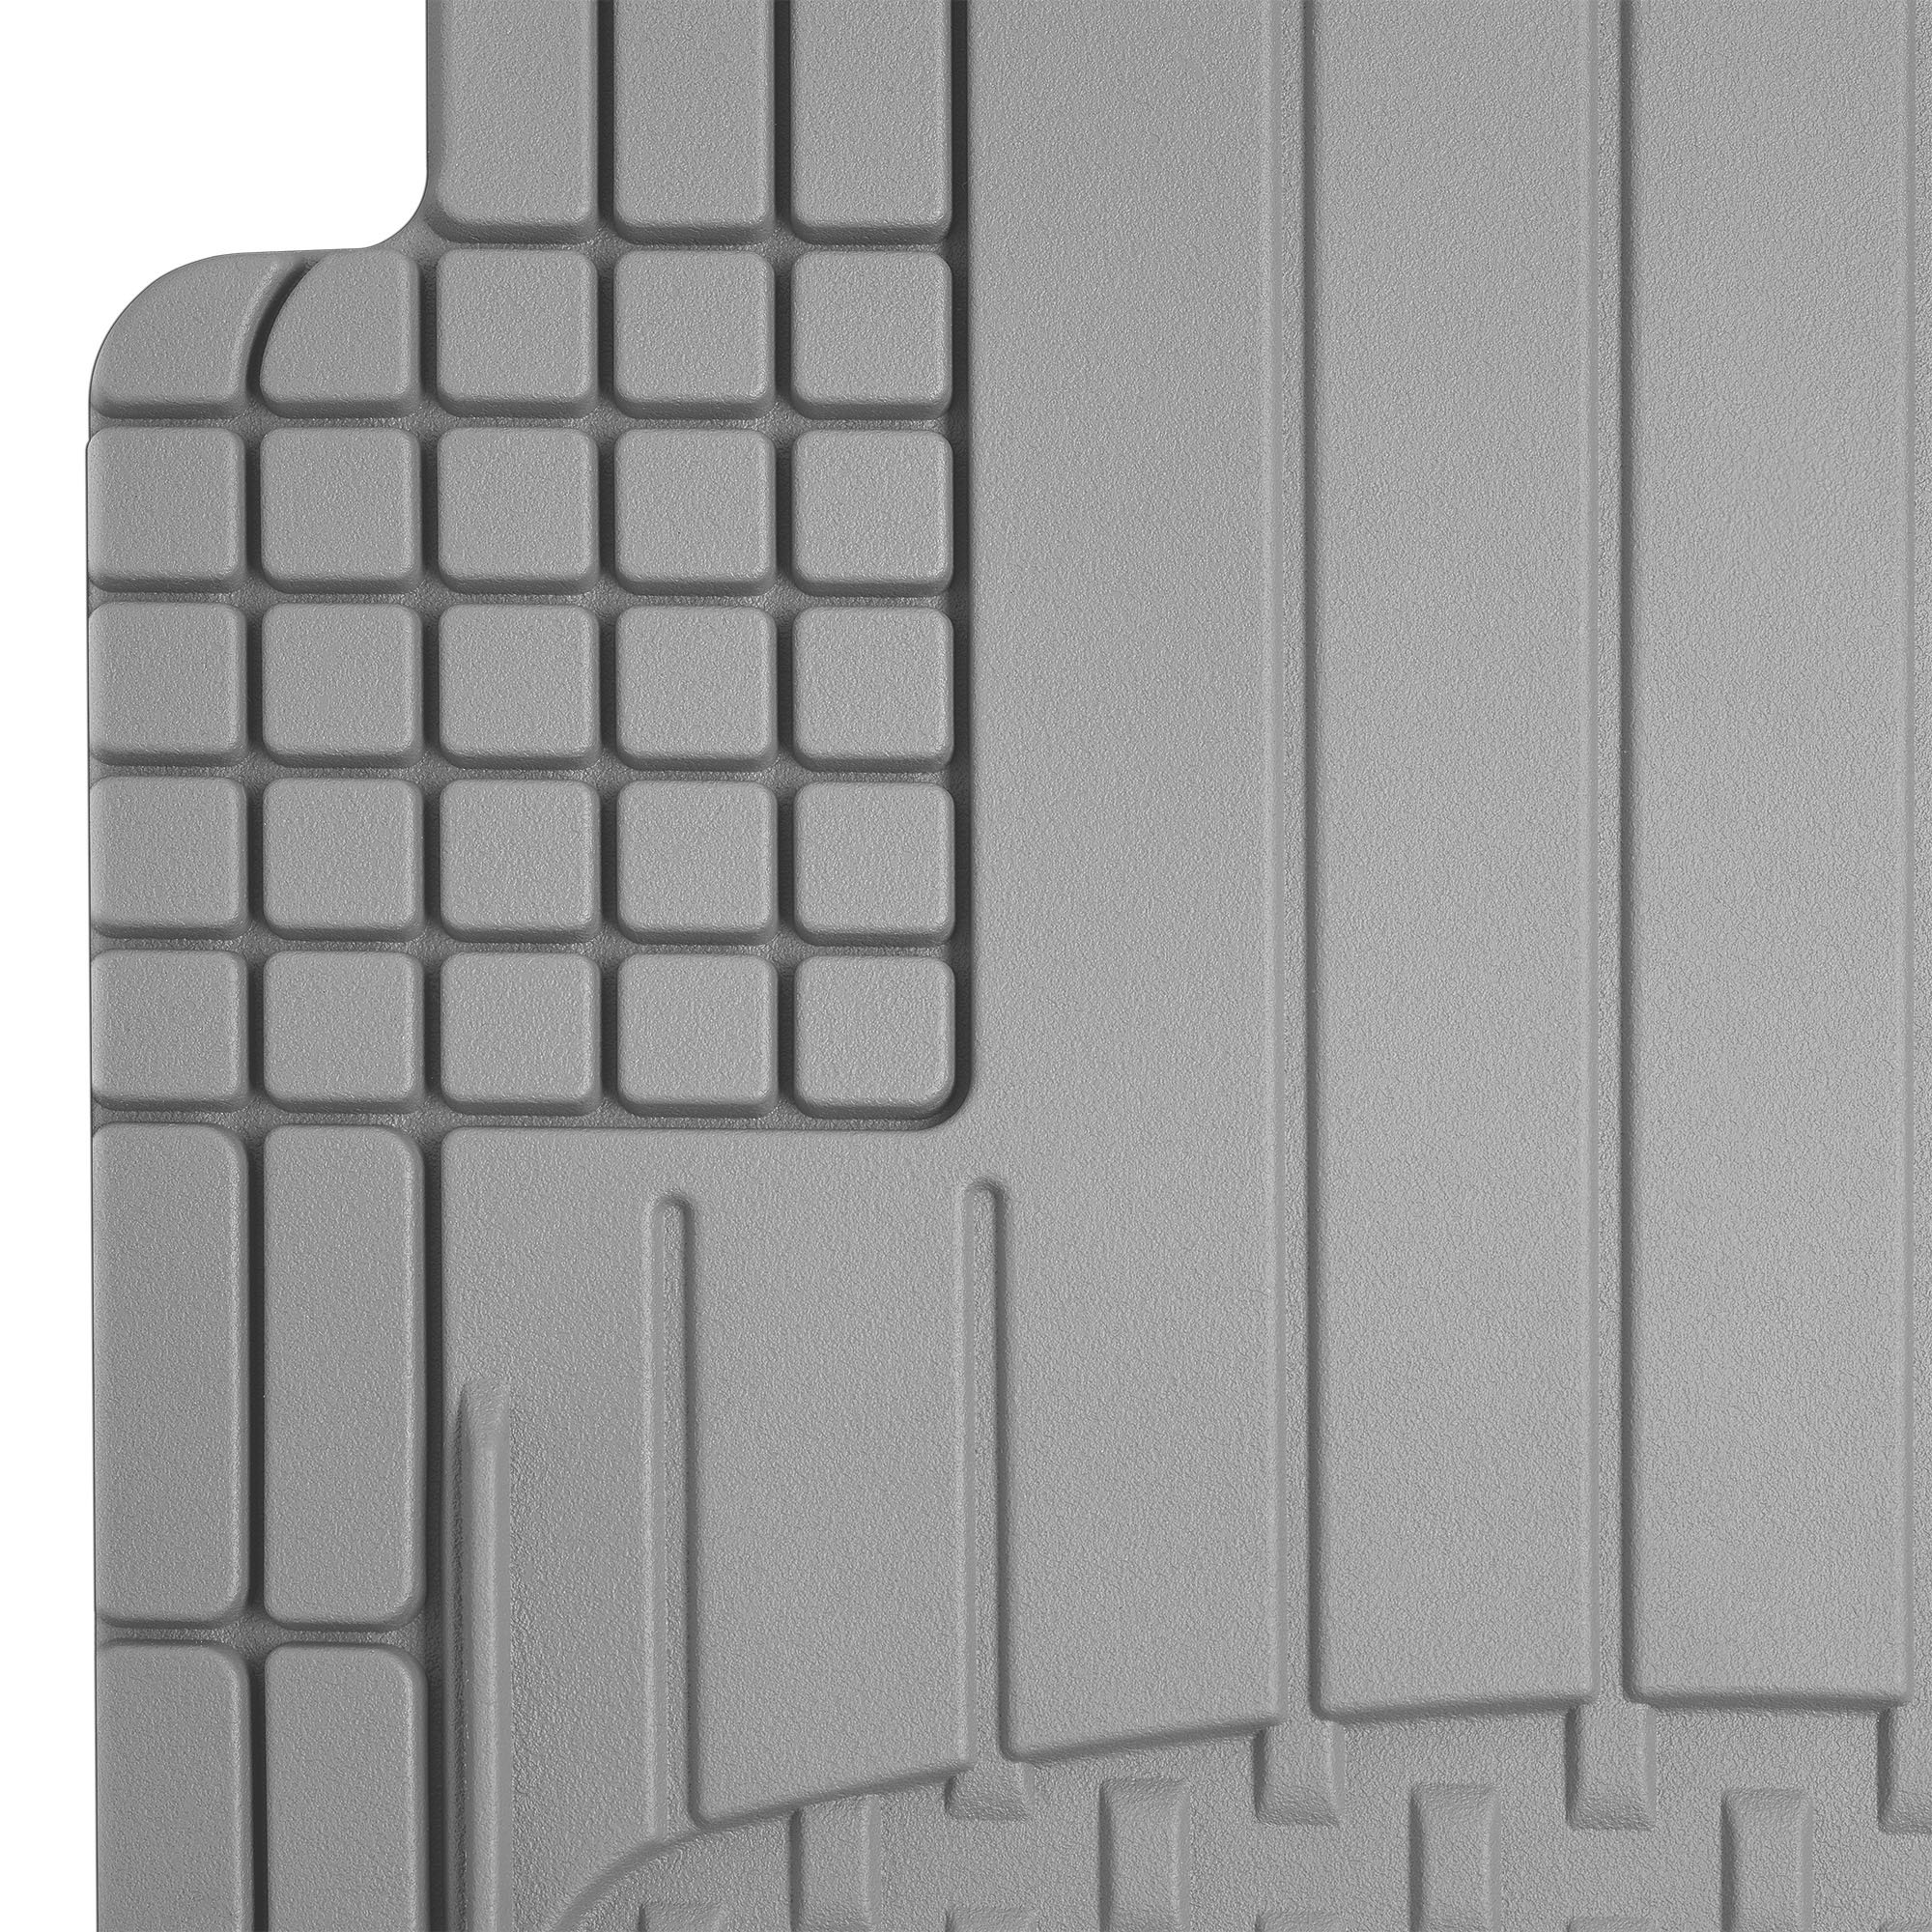  WeatherTech - Trim-to-Fit 3-pc Over The Hump Mat Set - Gray